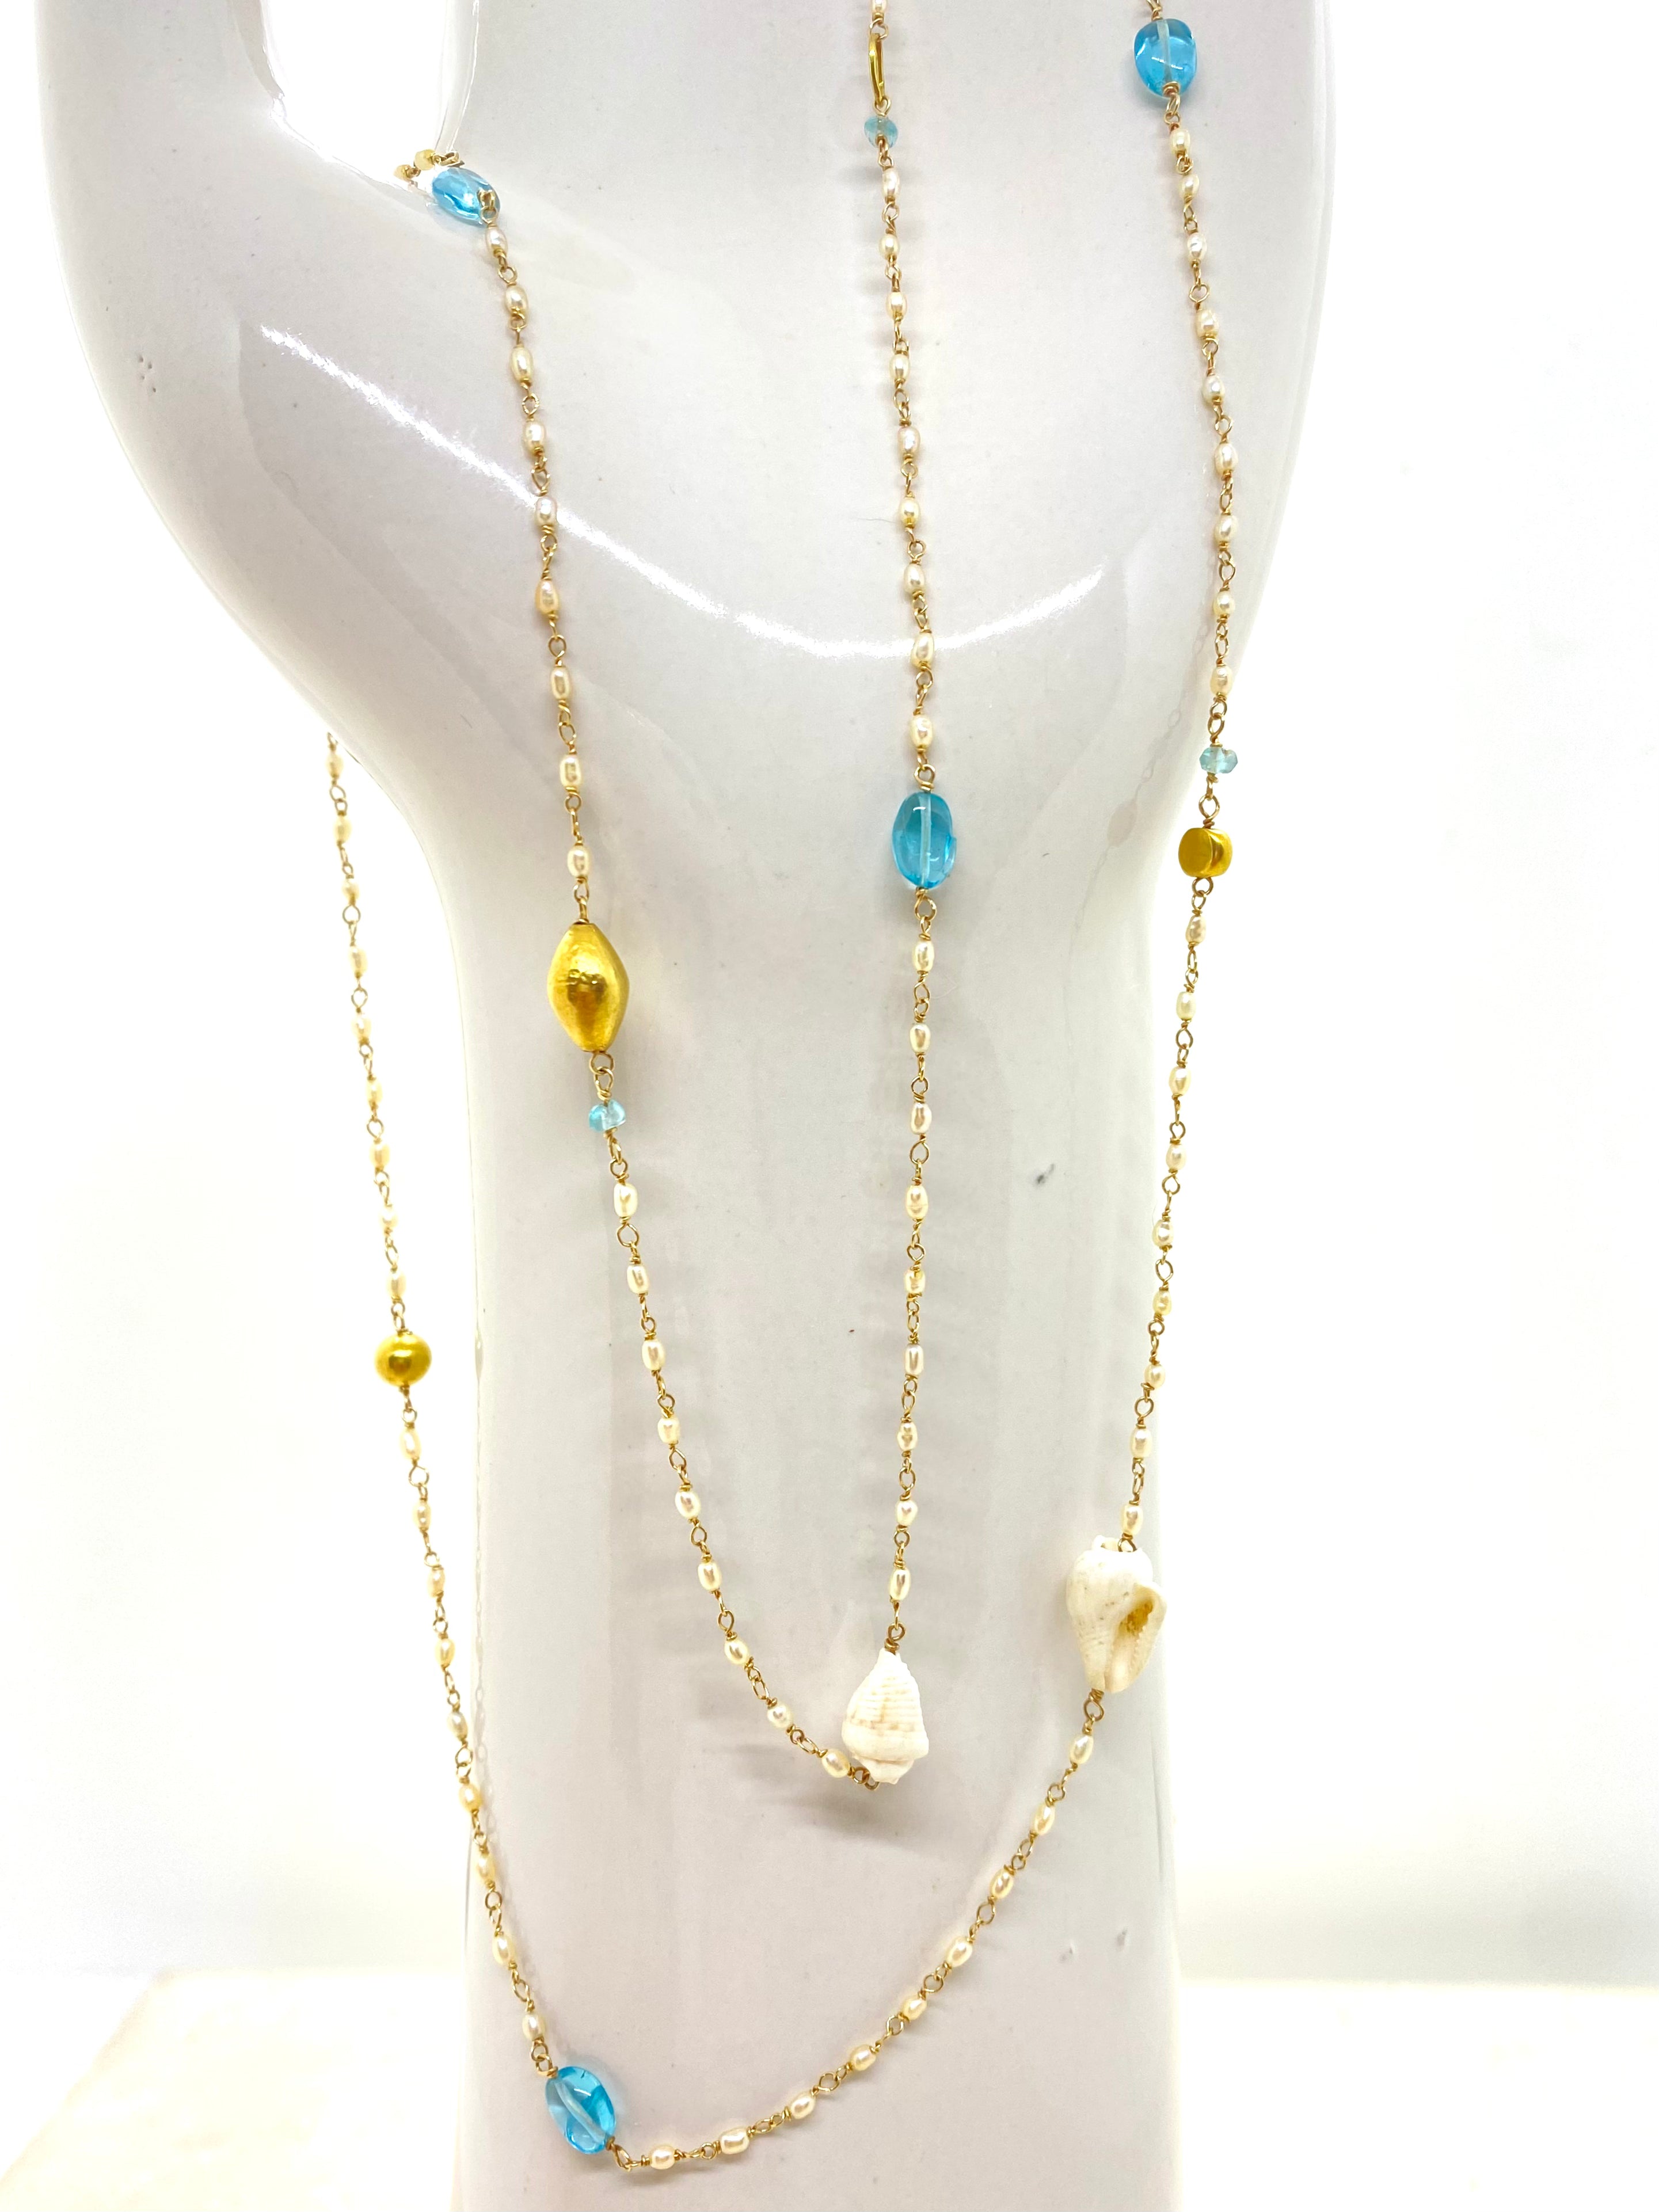 14k Gold Chain Necklace w/ Shells, Apatite, 18k Gold Nuggets & 18k Gold Loop